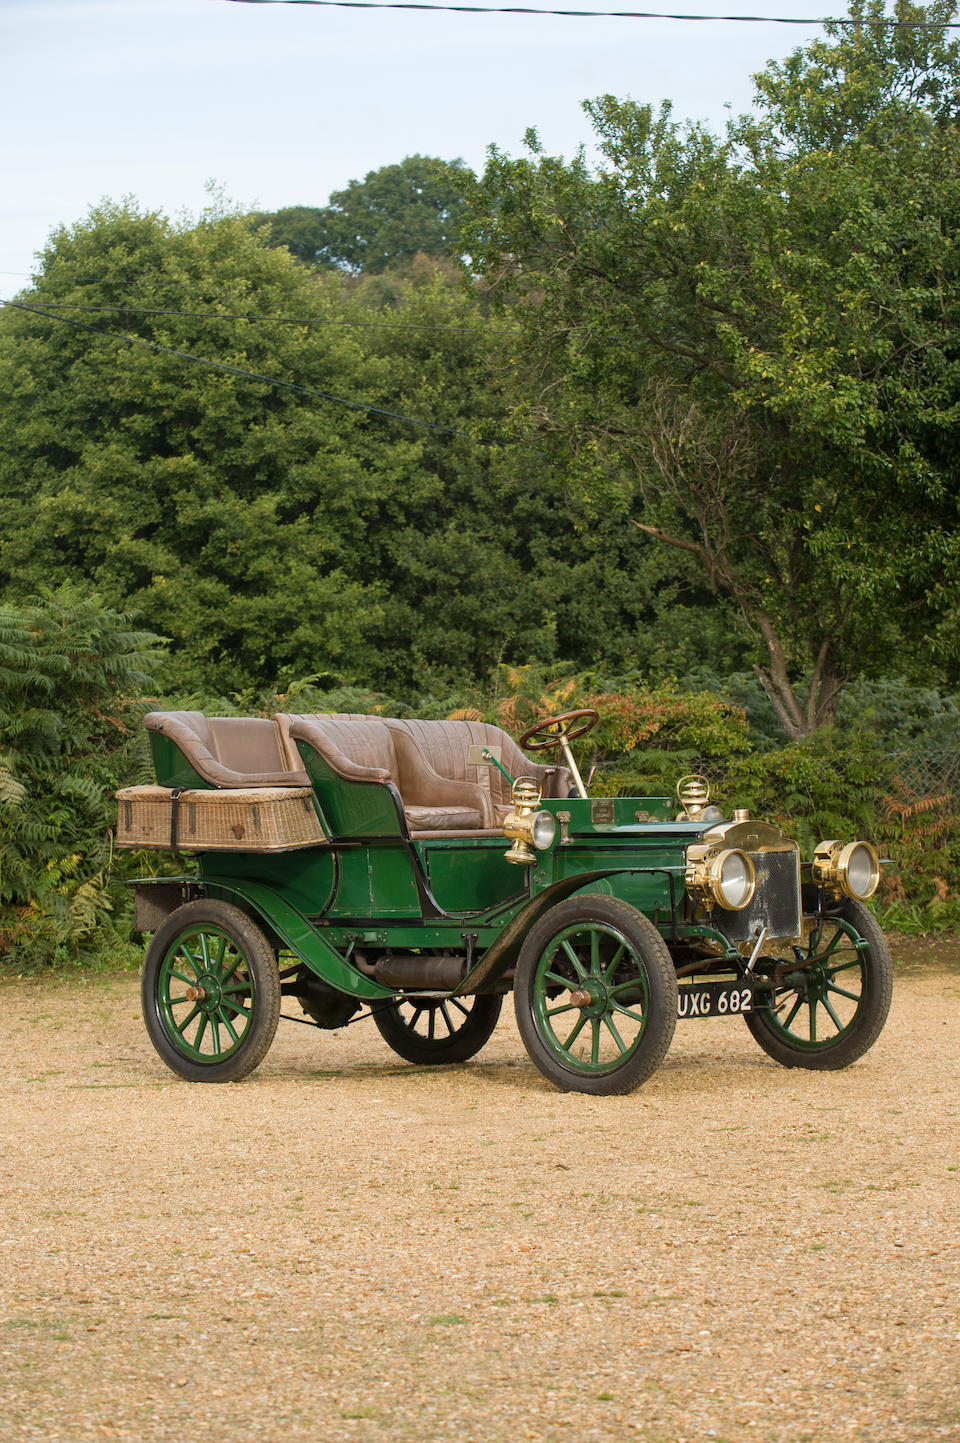 1904 Columbia Mark XLIII Two-Cylinder Rear Entrance Tonneau  Chassis no. 4220